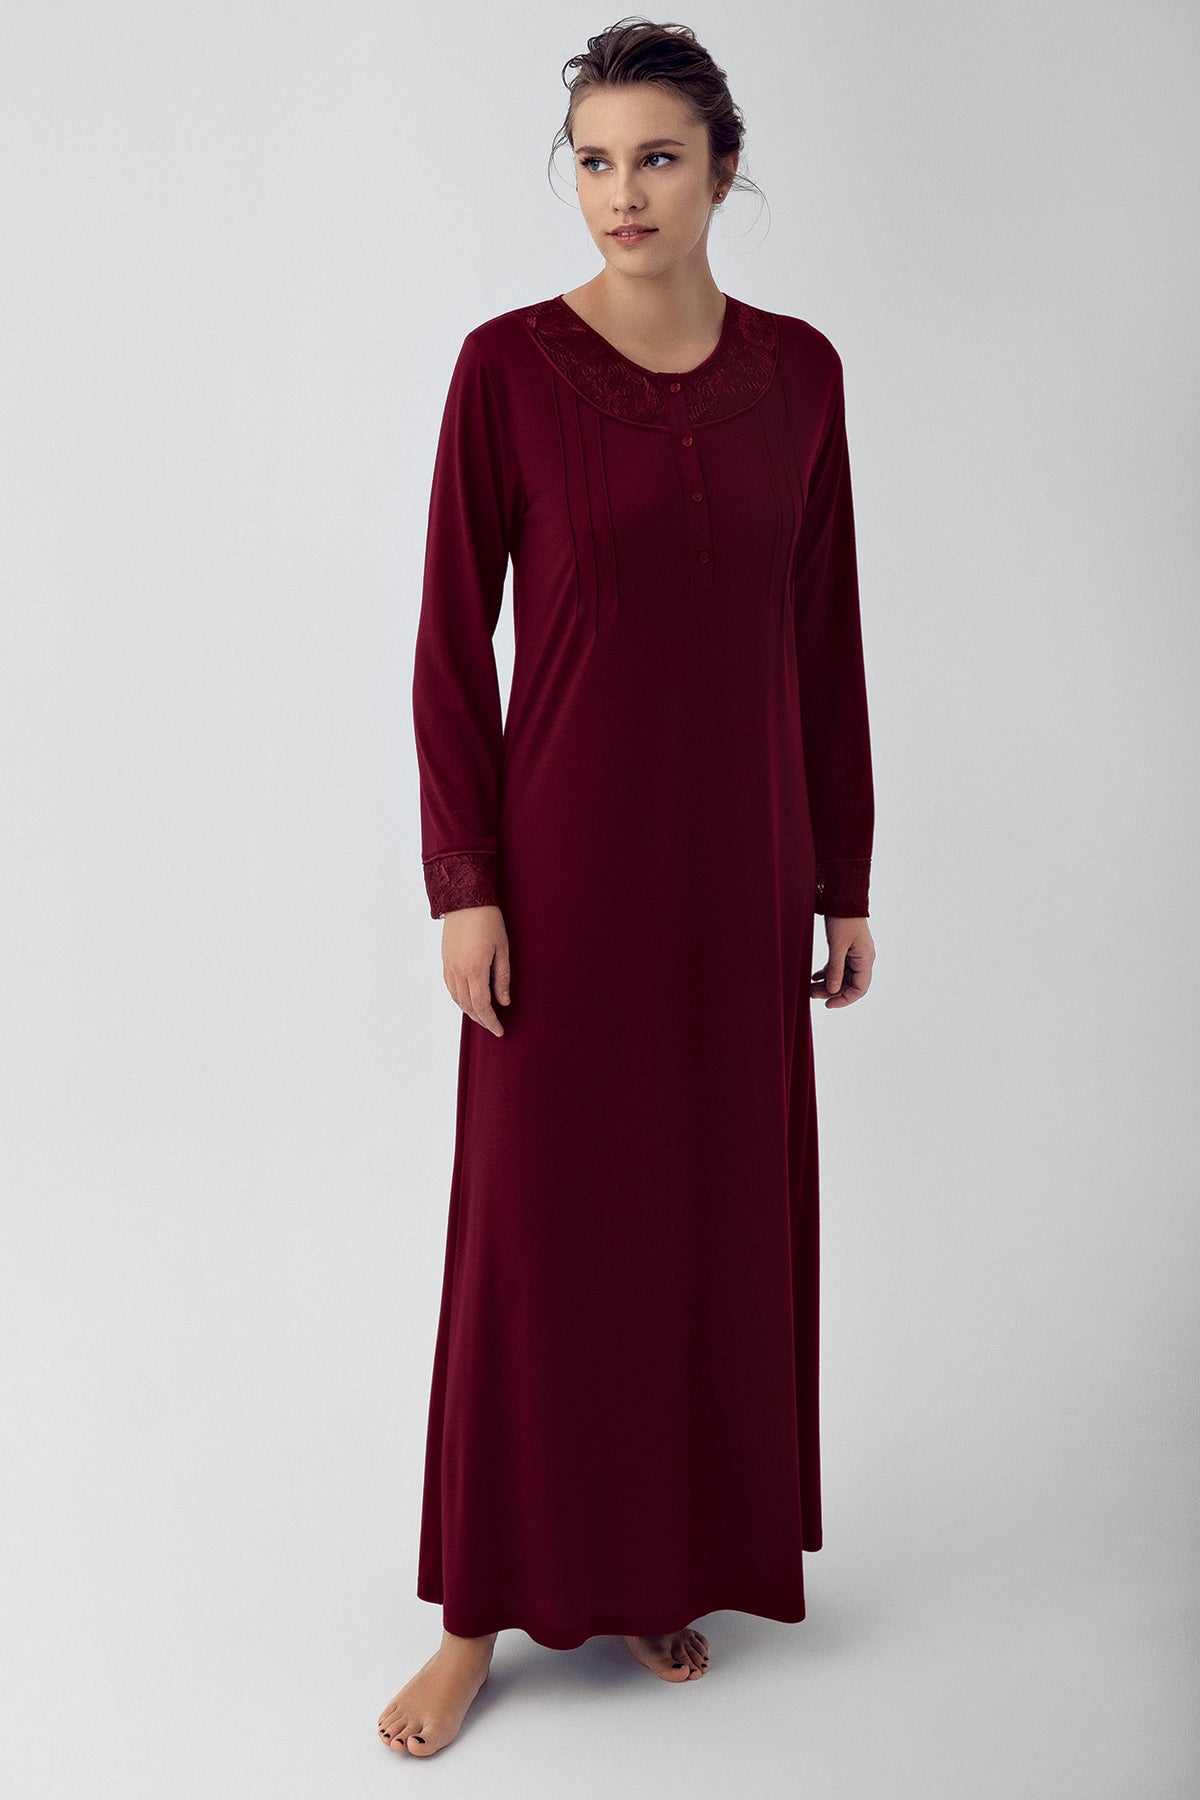 Lace Sleeve Long Maternity & Nursing Nightgown Claret Red - 16104